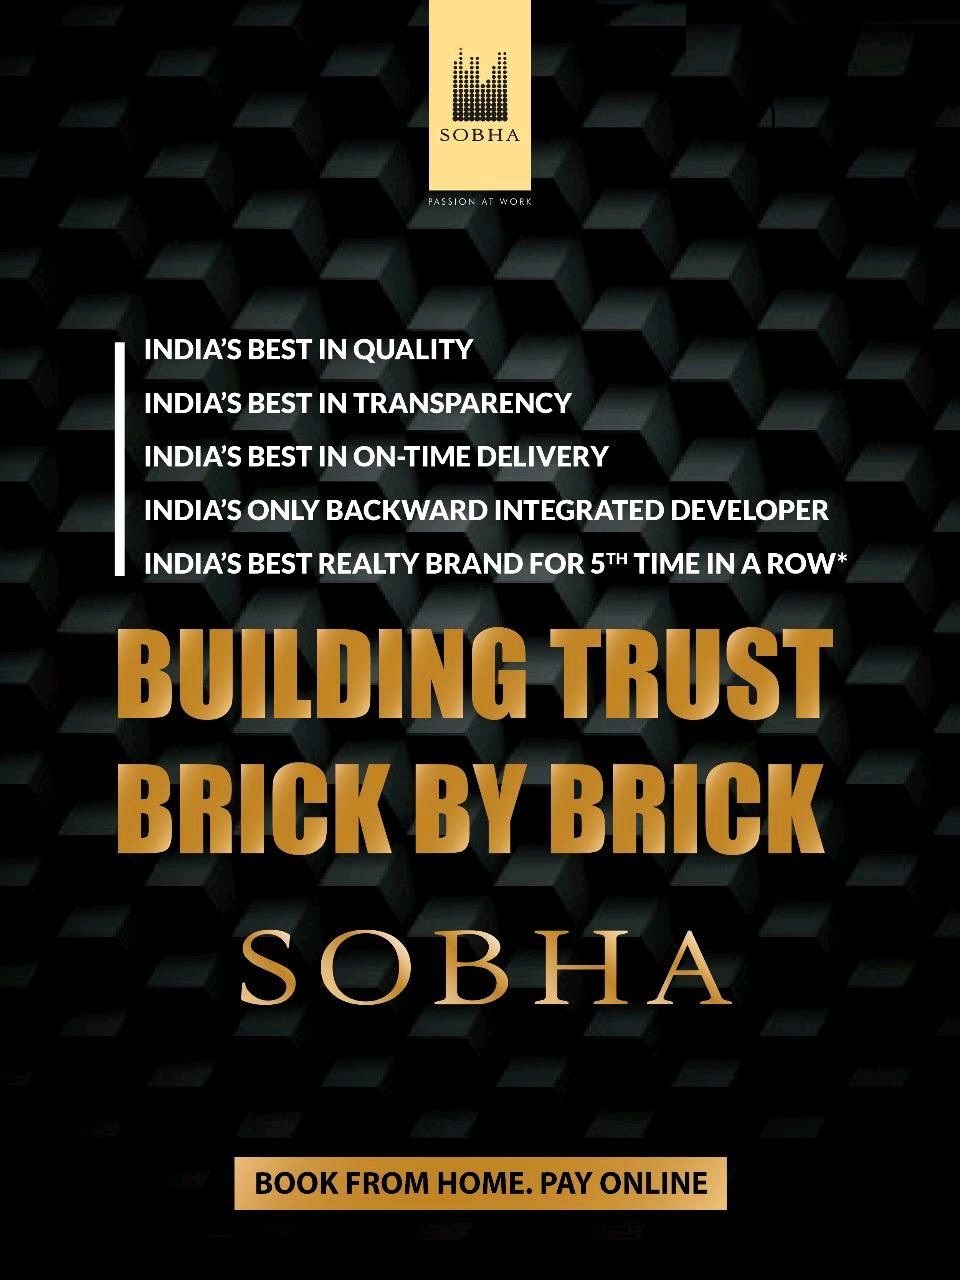 Building trust brick by brick with Sobha Developers Update